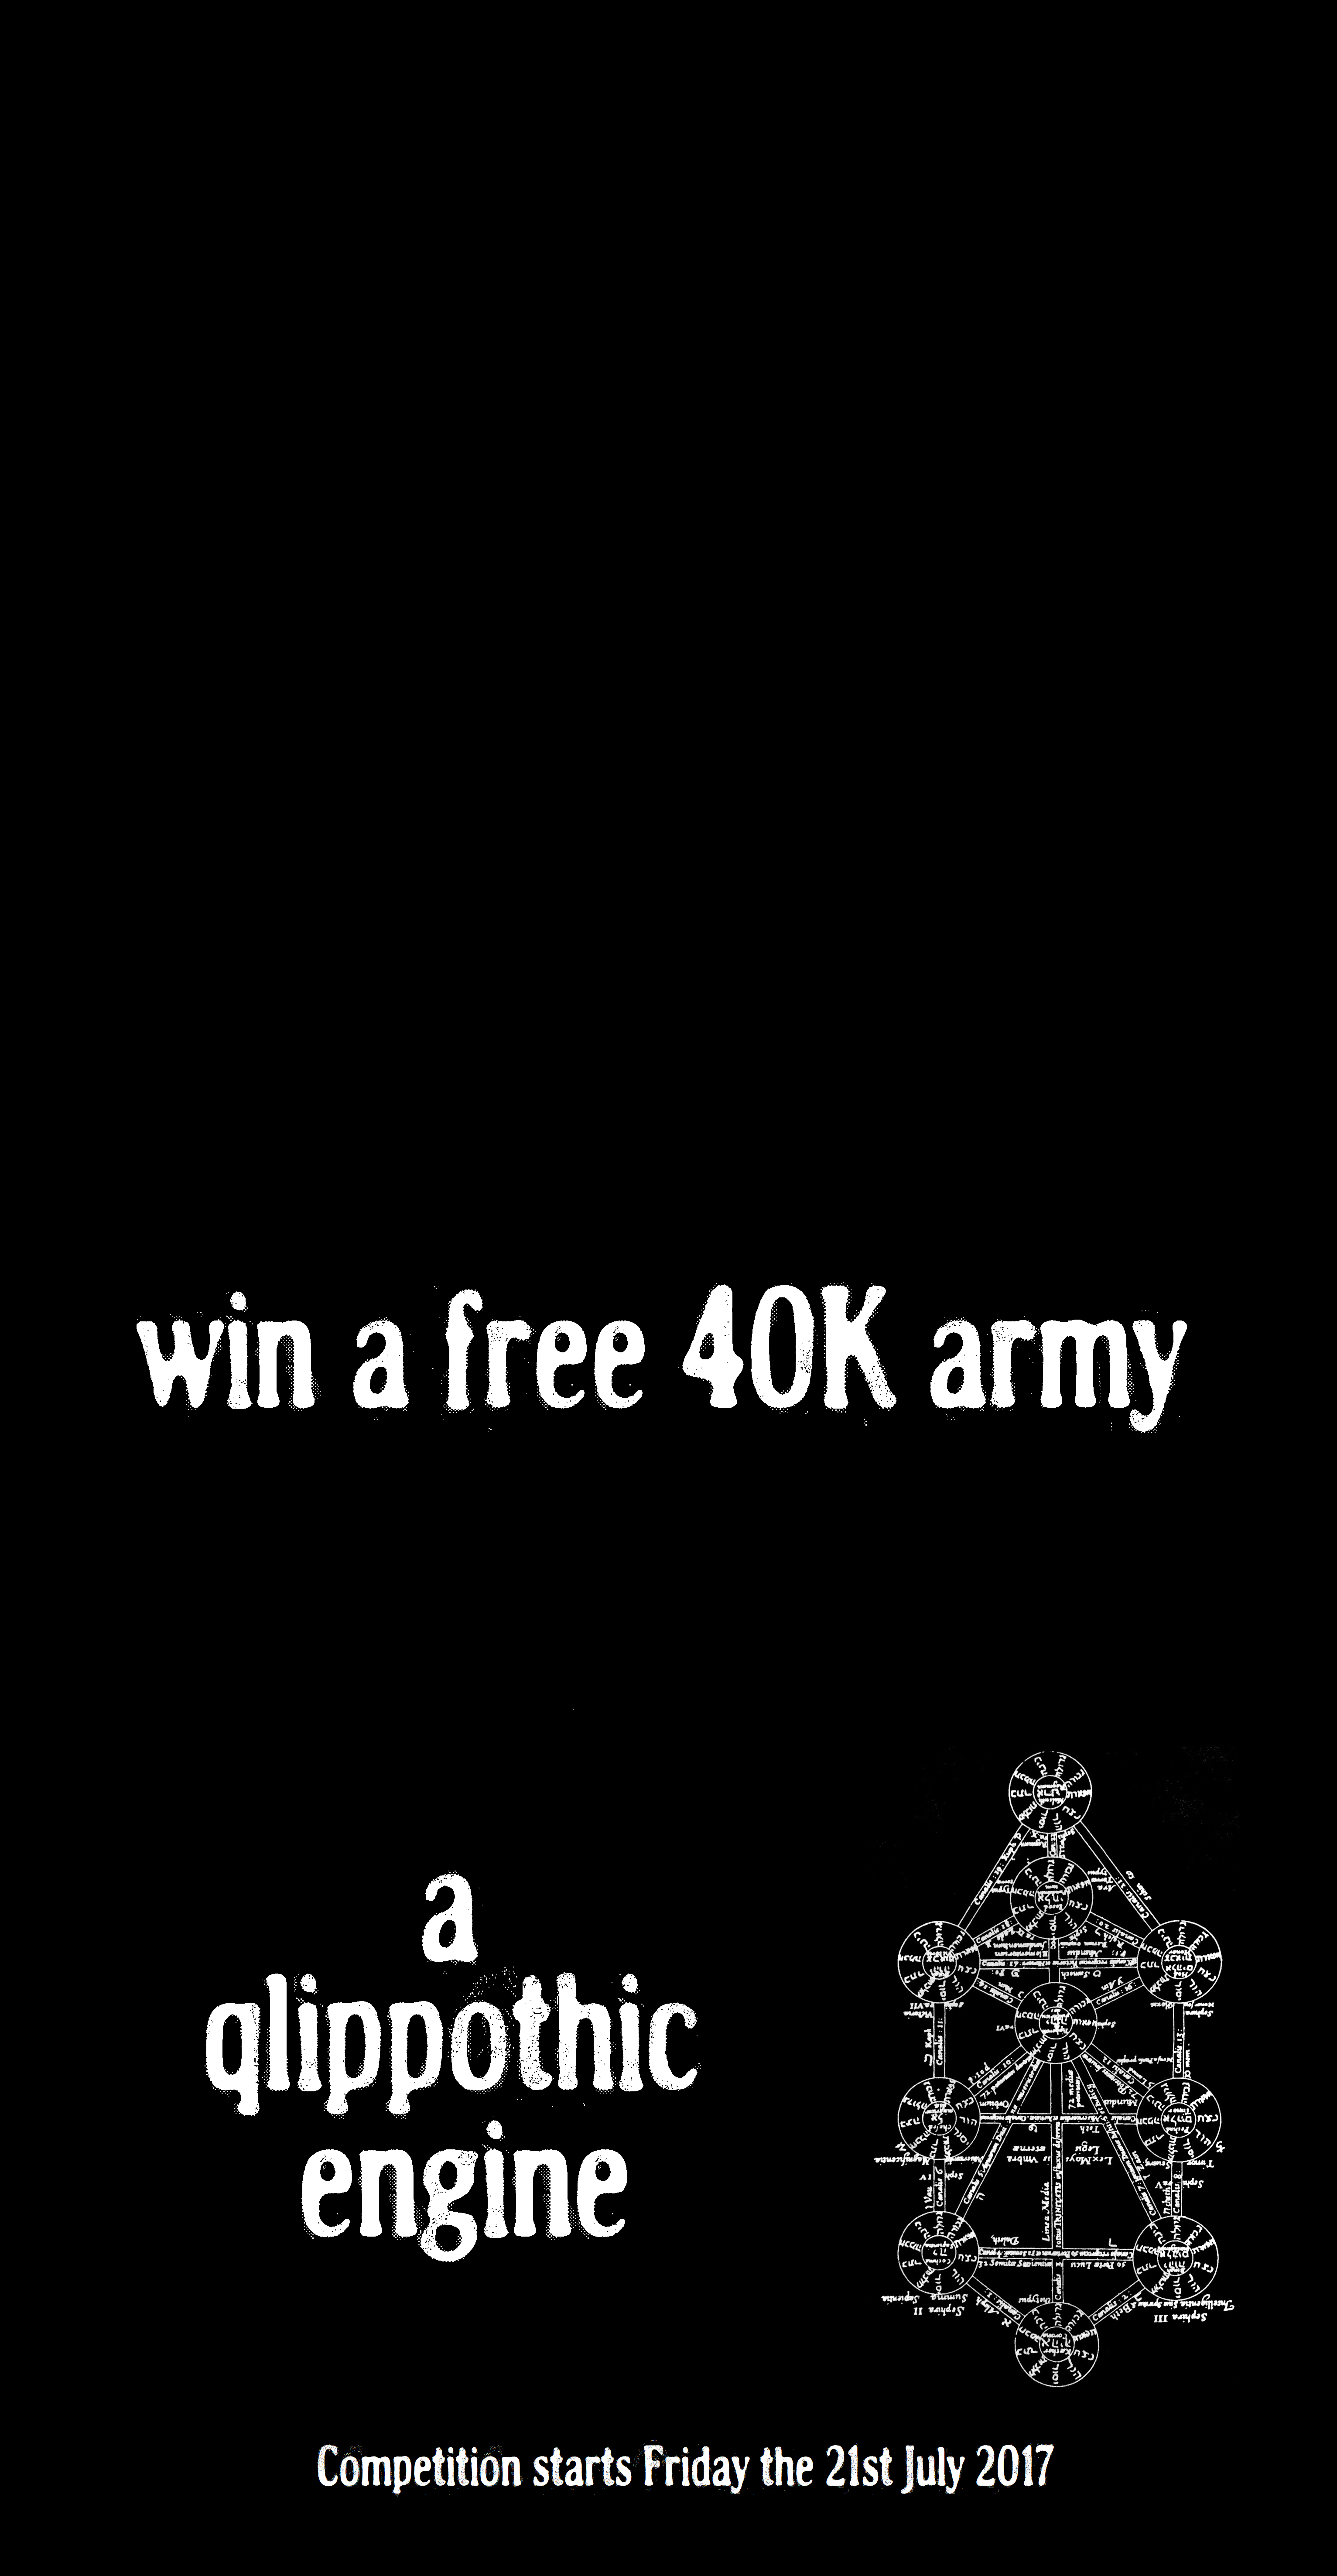 Win a free army.